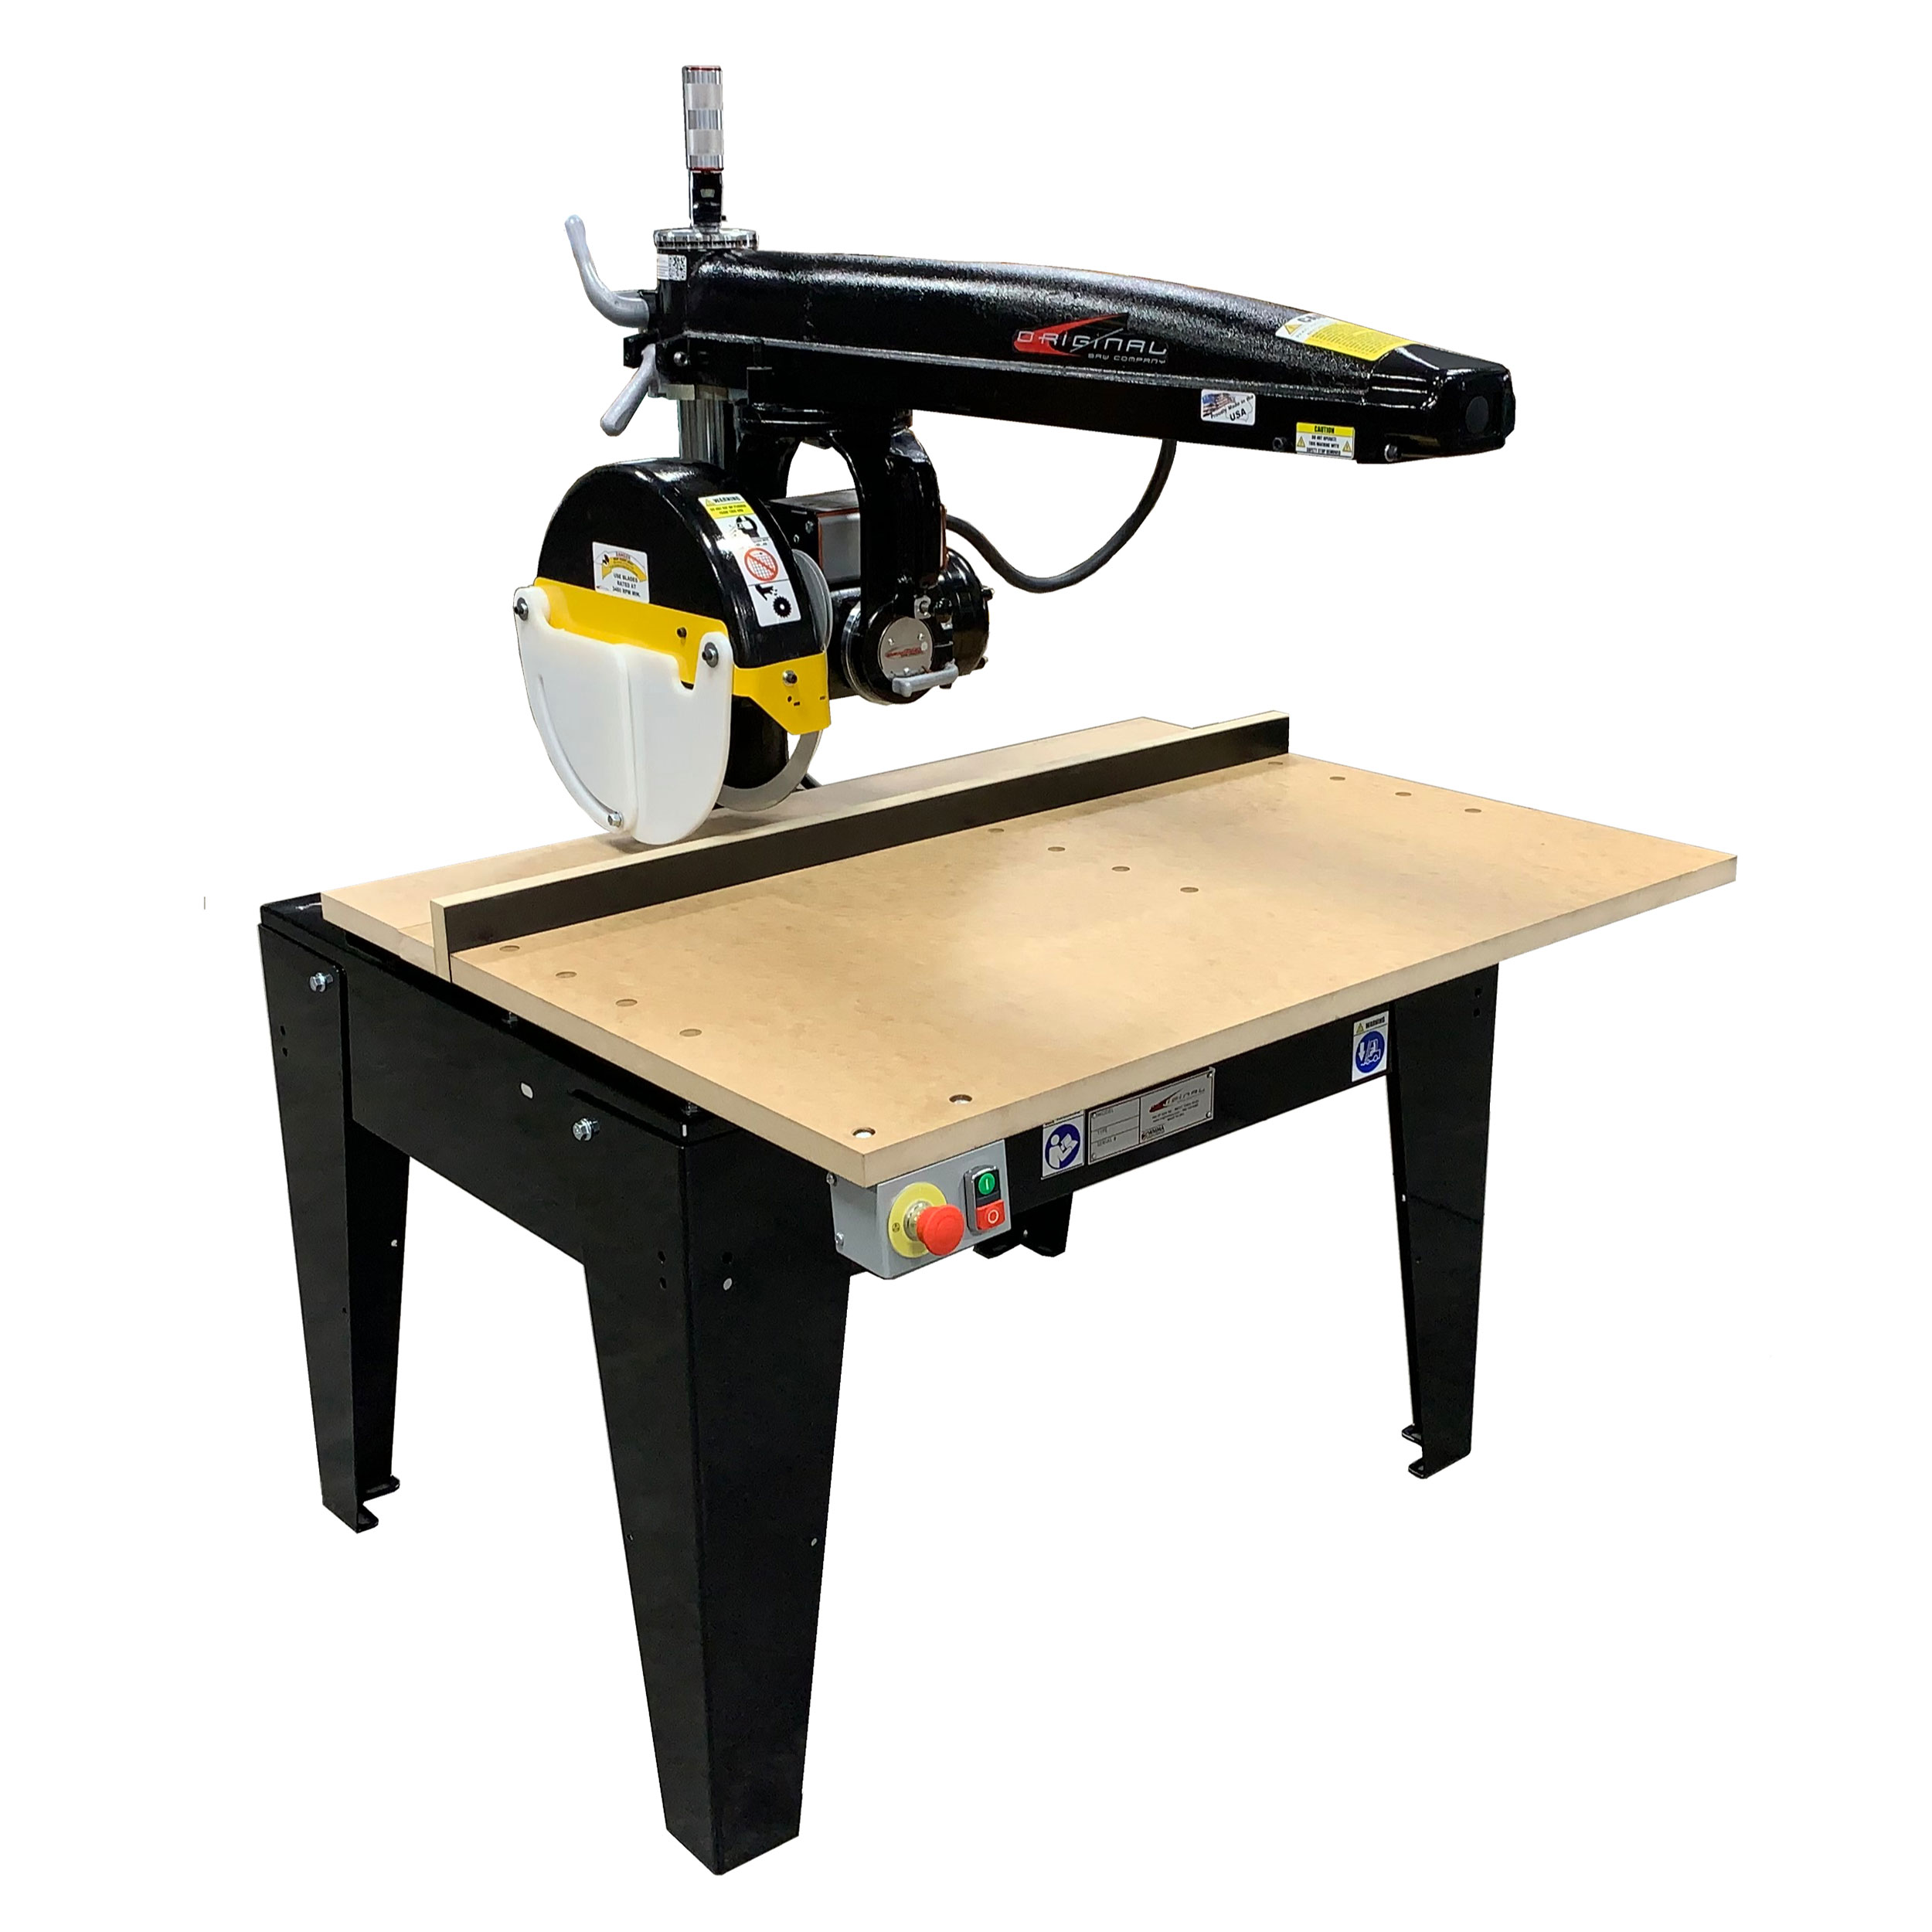 Radial Arm Saw With 14" Blade And 24" Crosscut, 5hp 3 Phase 208/230v